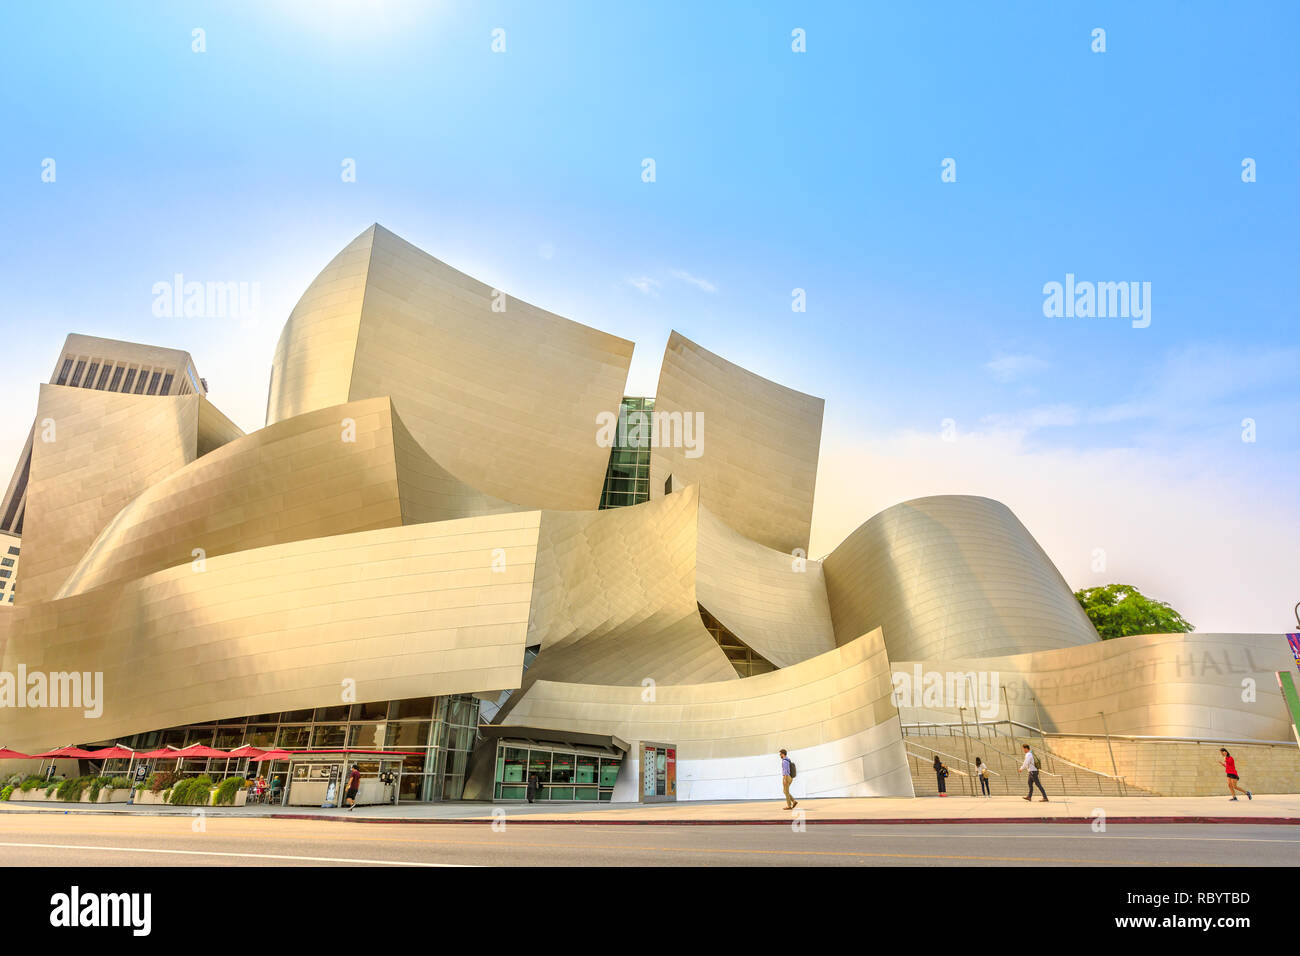 Los Angeles, California, United States - August 9, 2018: Walt Disney Concert Hall, by Frank Gehry, Grand Avenue on Bunker Hill, Downtown of LA, home to Los Angeles Philharmonic Orchestra and Choir. Stock Photo